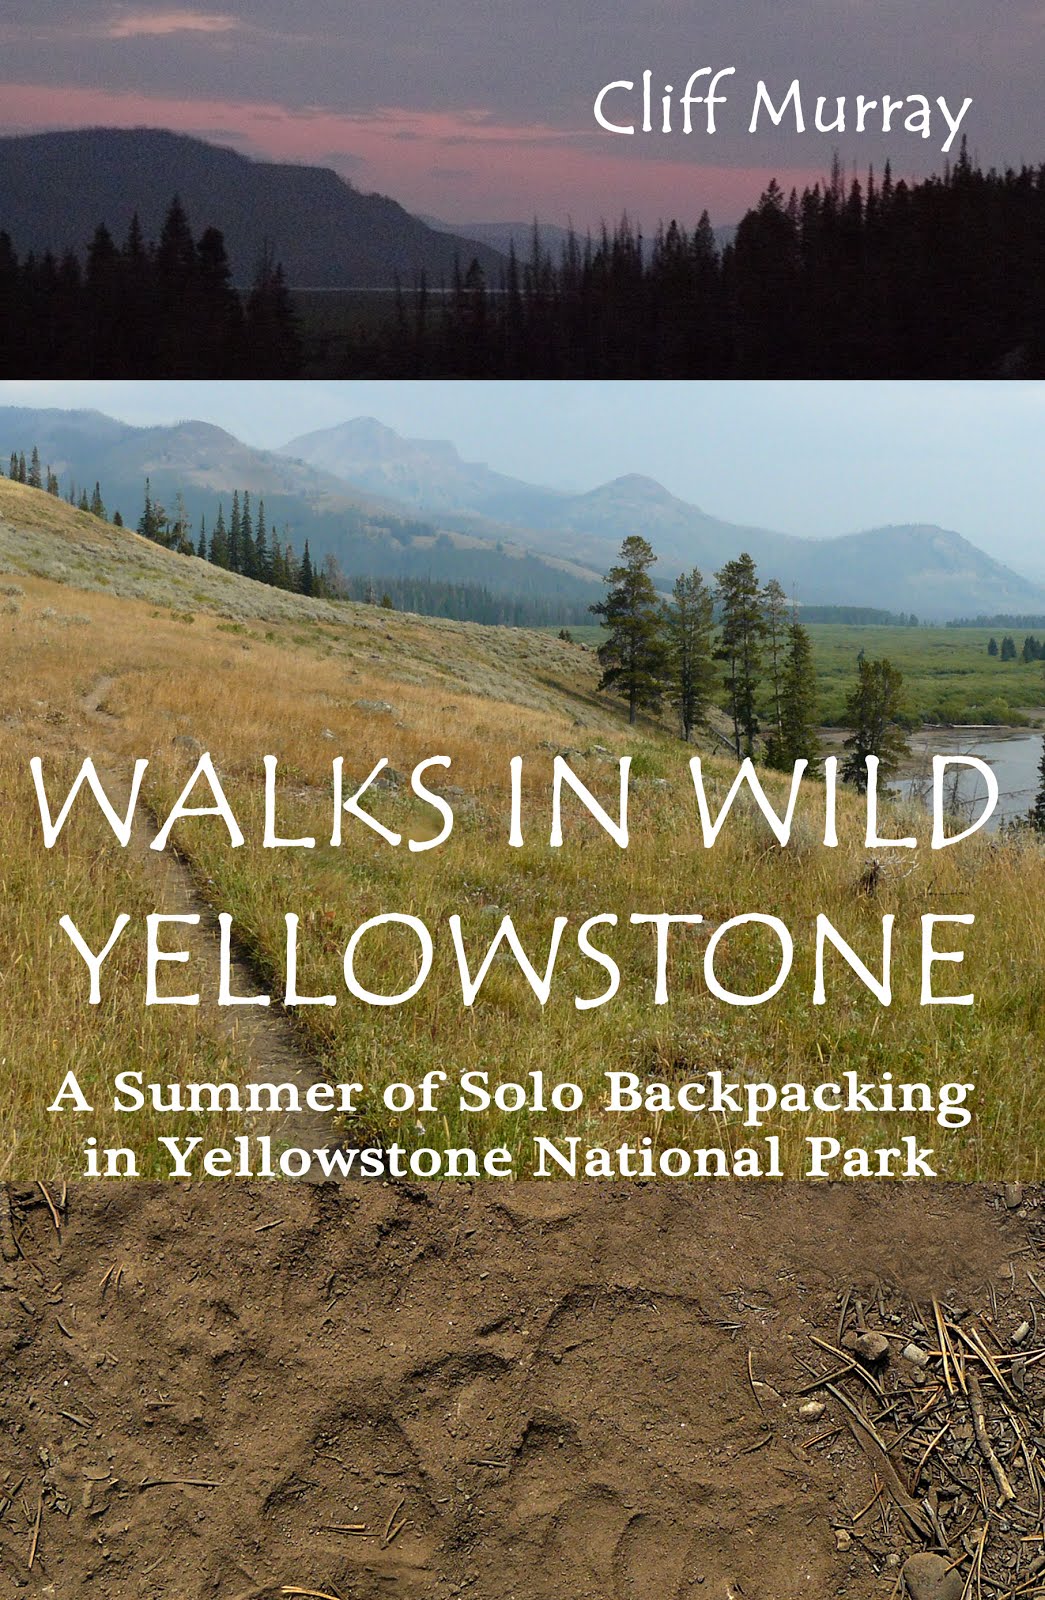 My Yellowstone Book is out!